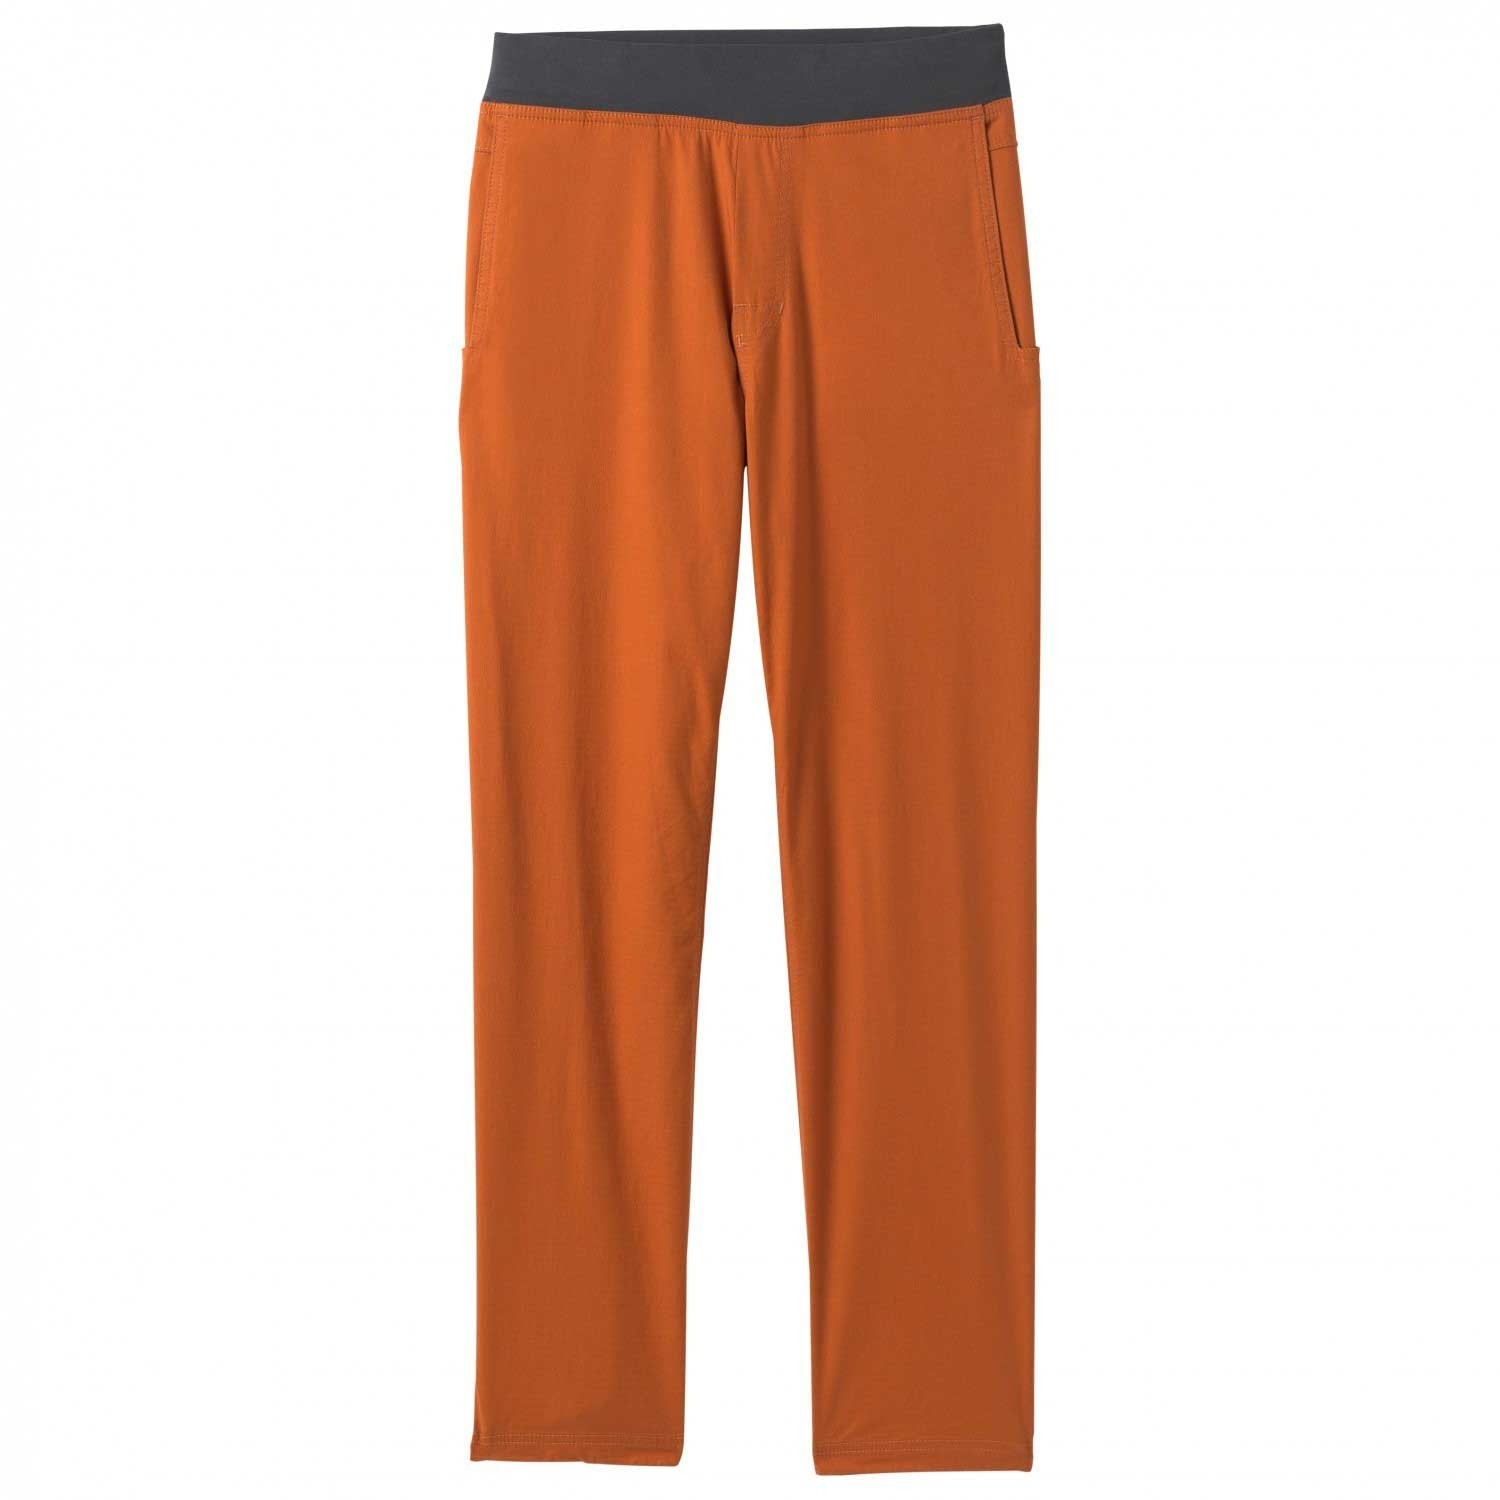 Prana Moaby Pant - Russet